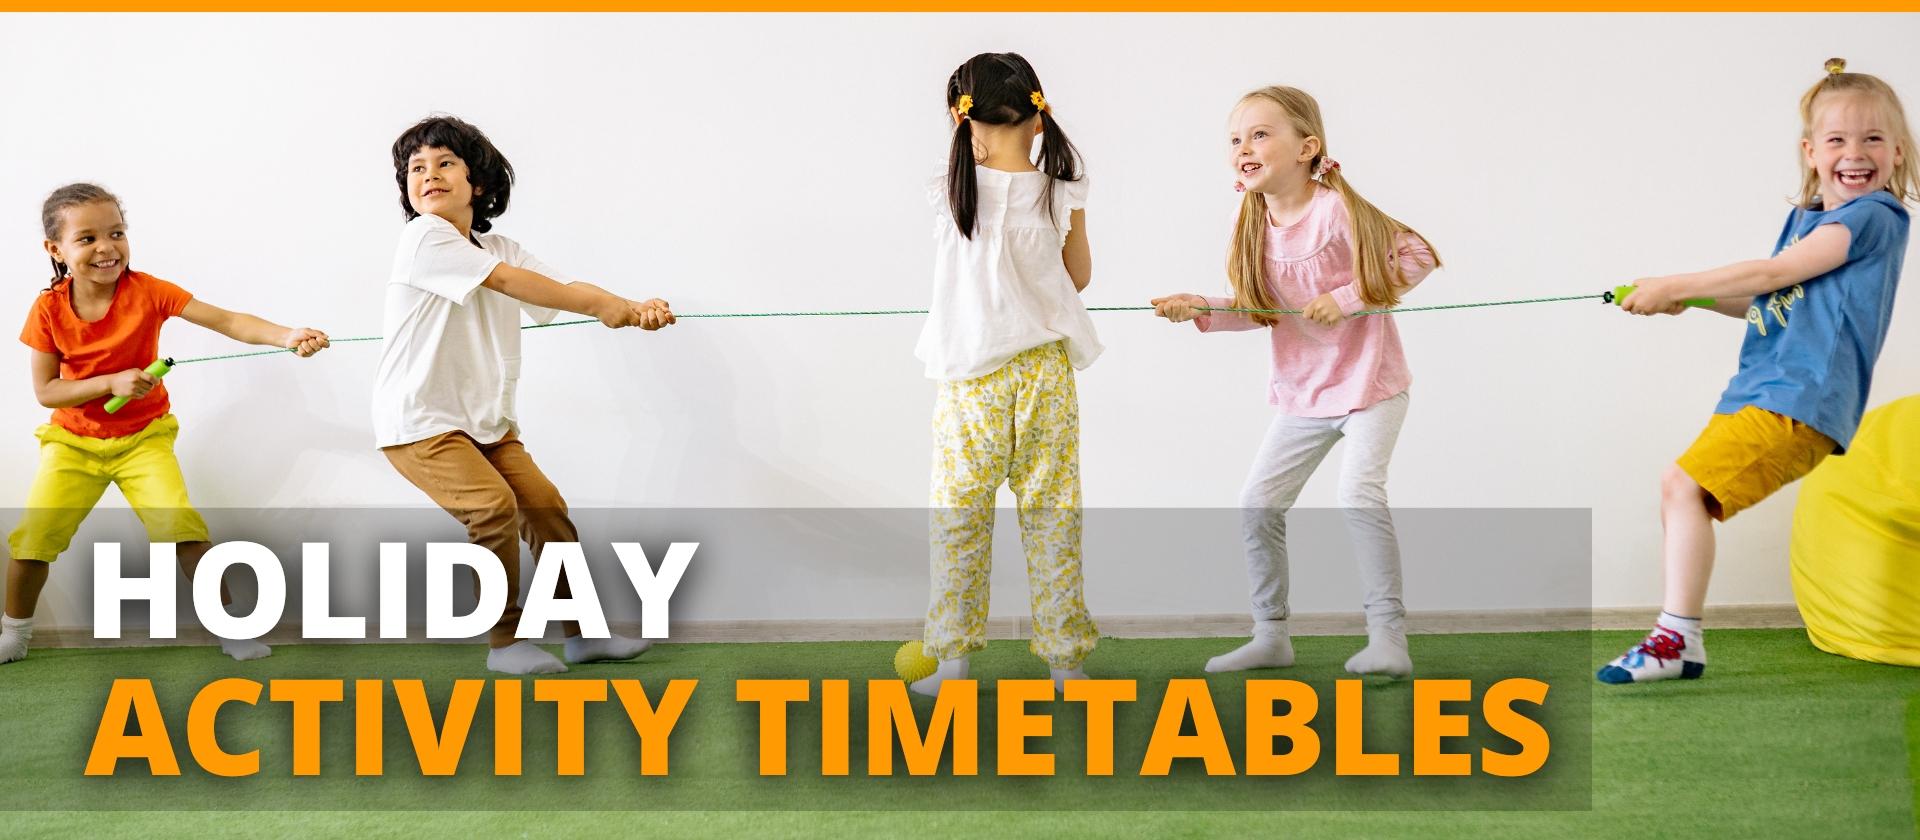 North Warwickshire childrens holiday activity timetables